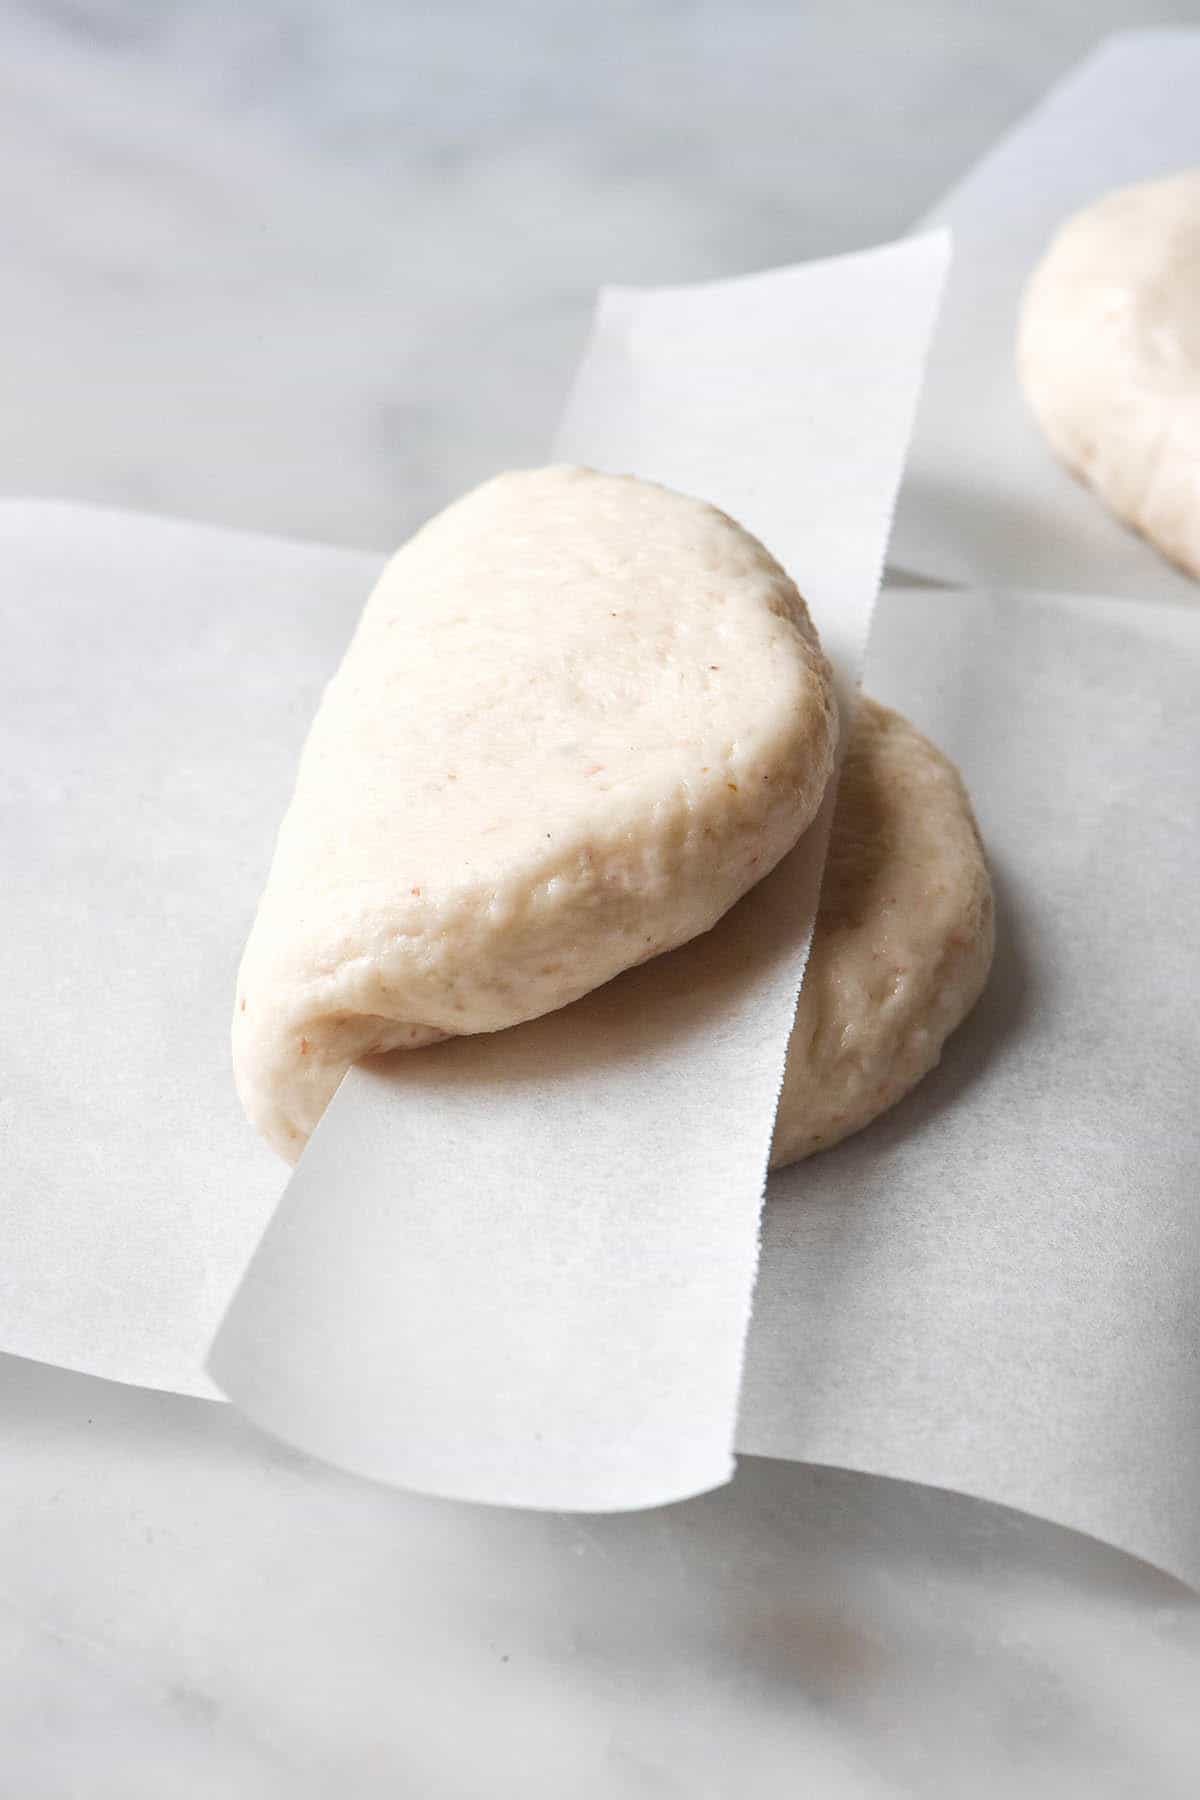 An instructional image regarding how to shape gluten free bao buns. The unshaped buns sit on a white marble table